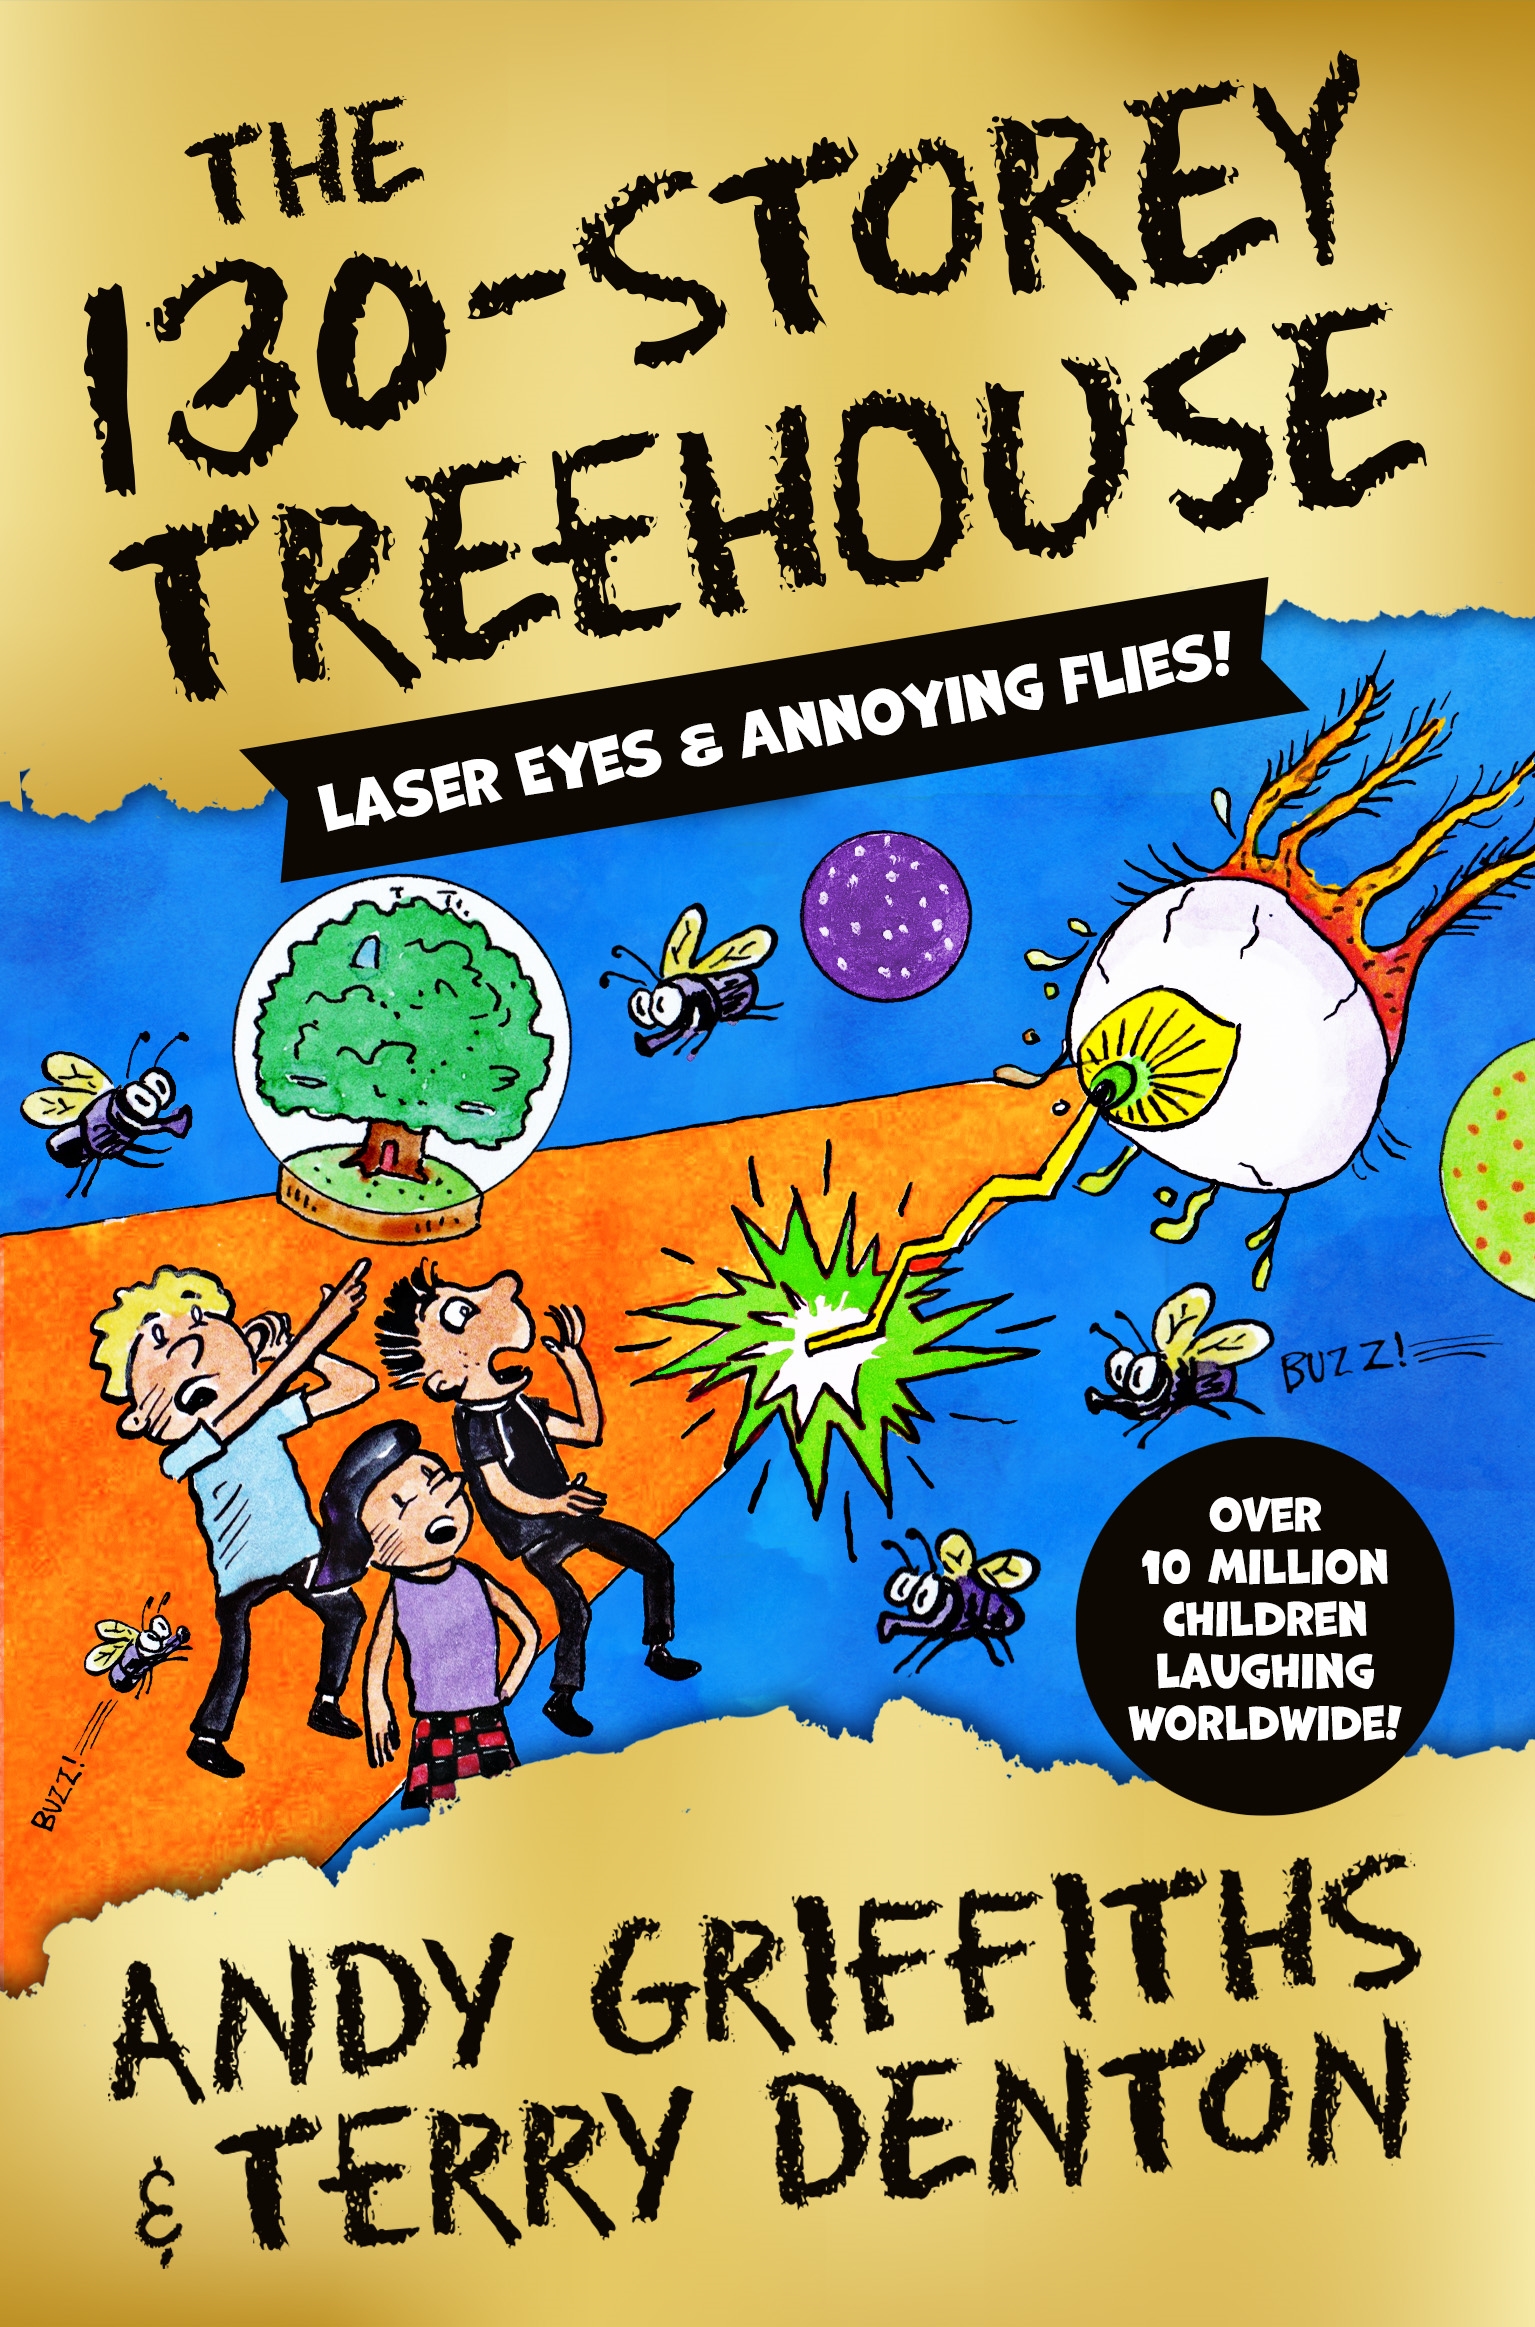 Virtual Event with Andy Griffiths, bestselling author of The Treehouse Series